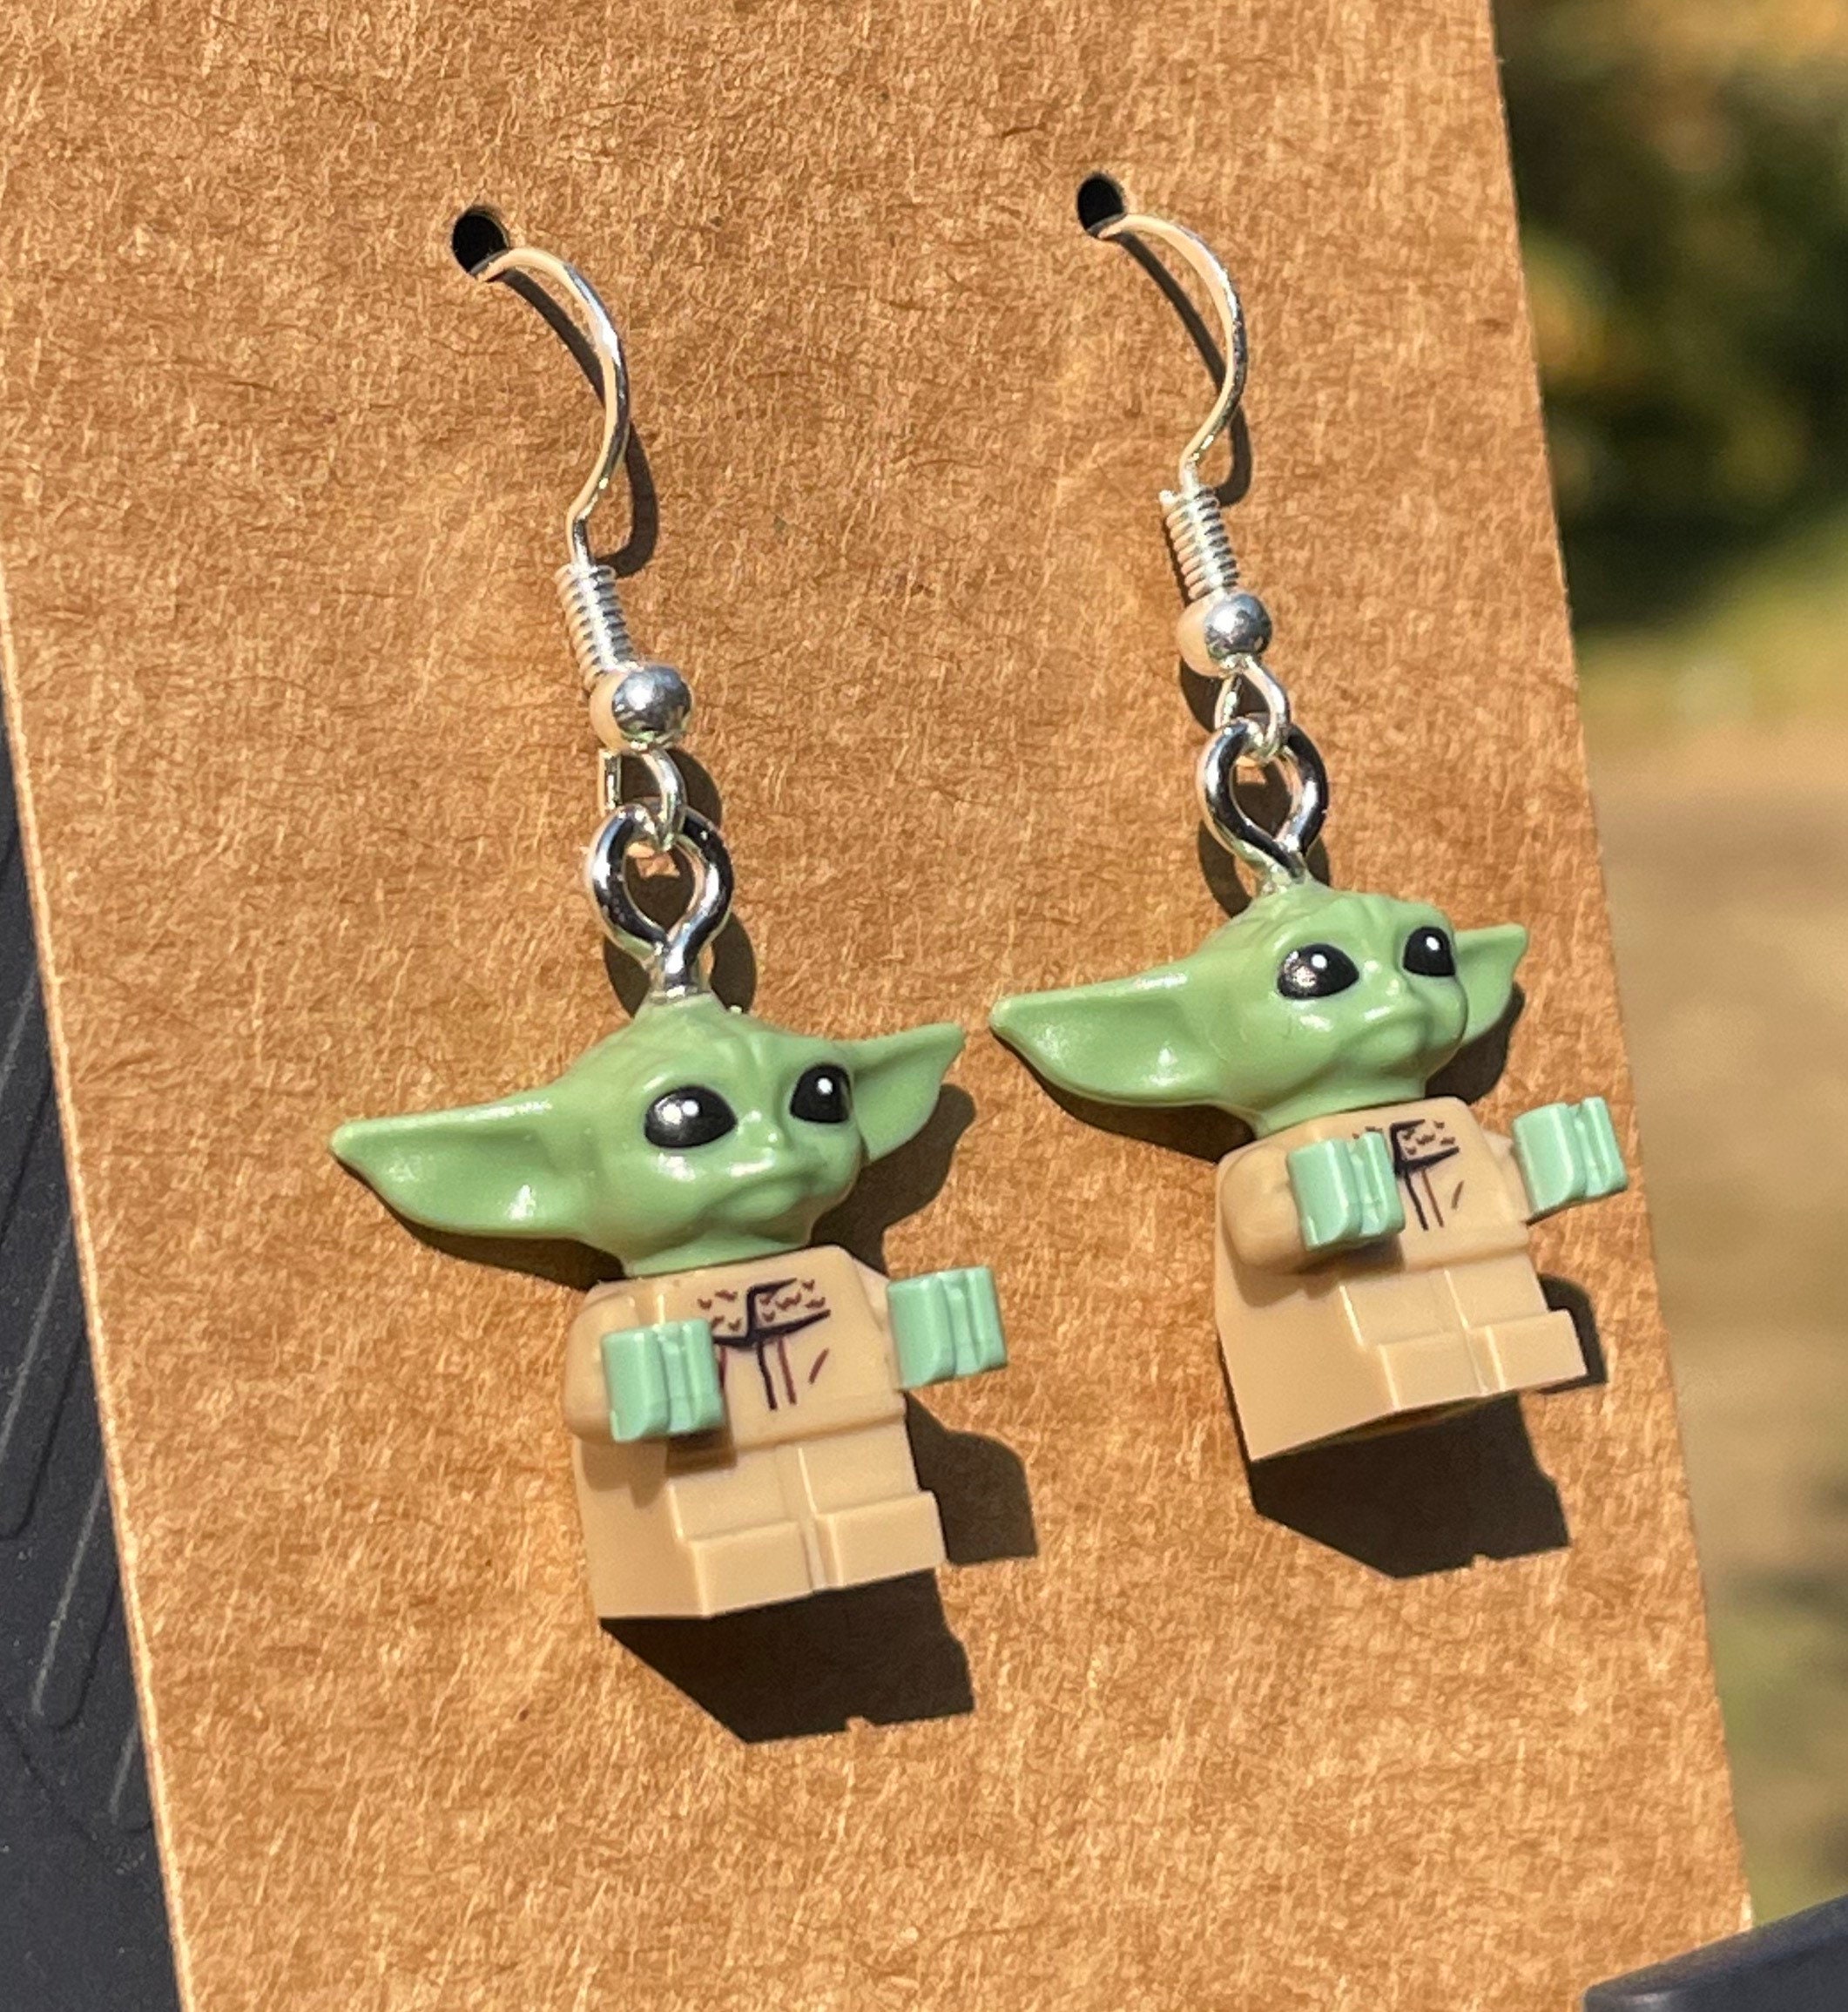 Cute Baby Yoda Figure Pearl Cage Necklace Movie Stainless Steel